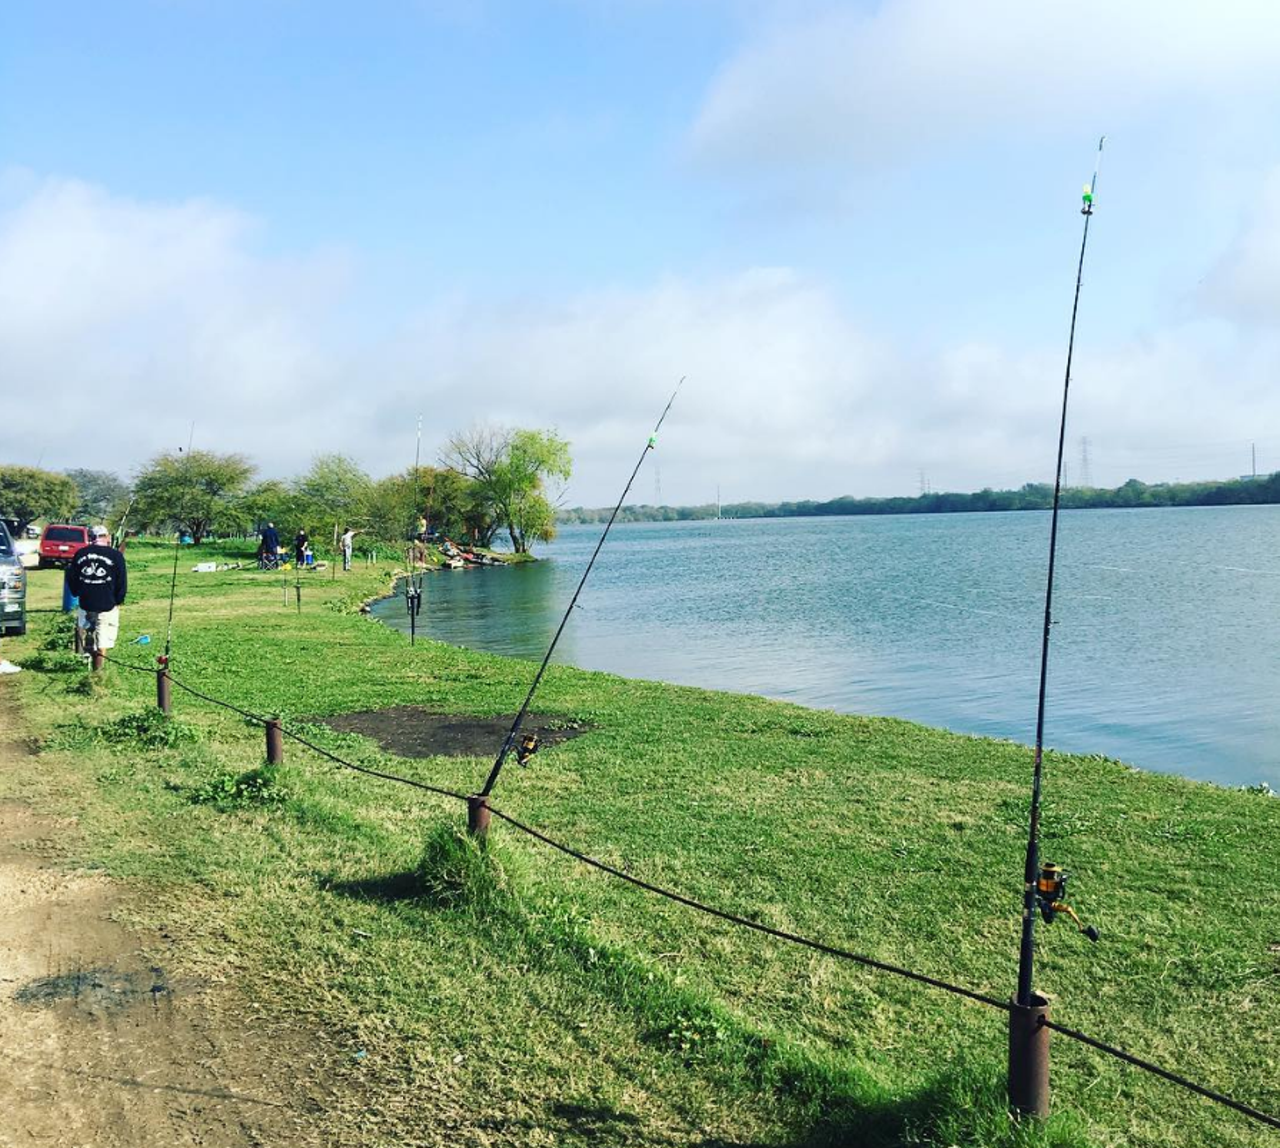 Braunig Lake
17500 Donop Rd, (210) 635-8289
Two paved boat ramps are available at this power plant reservoir which is stocked full with Largemouth Bass and Red Drum.
Instagram/@bcelestino_93